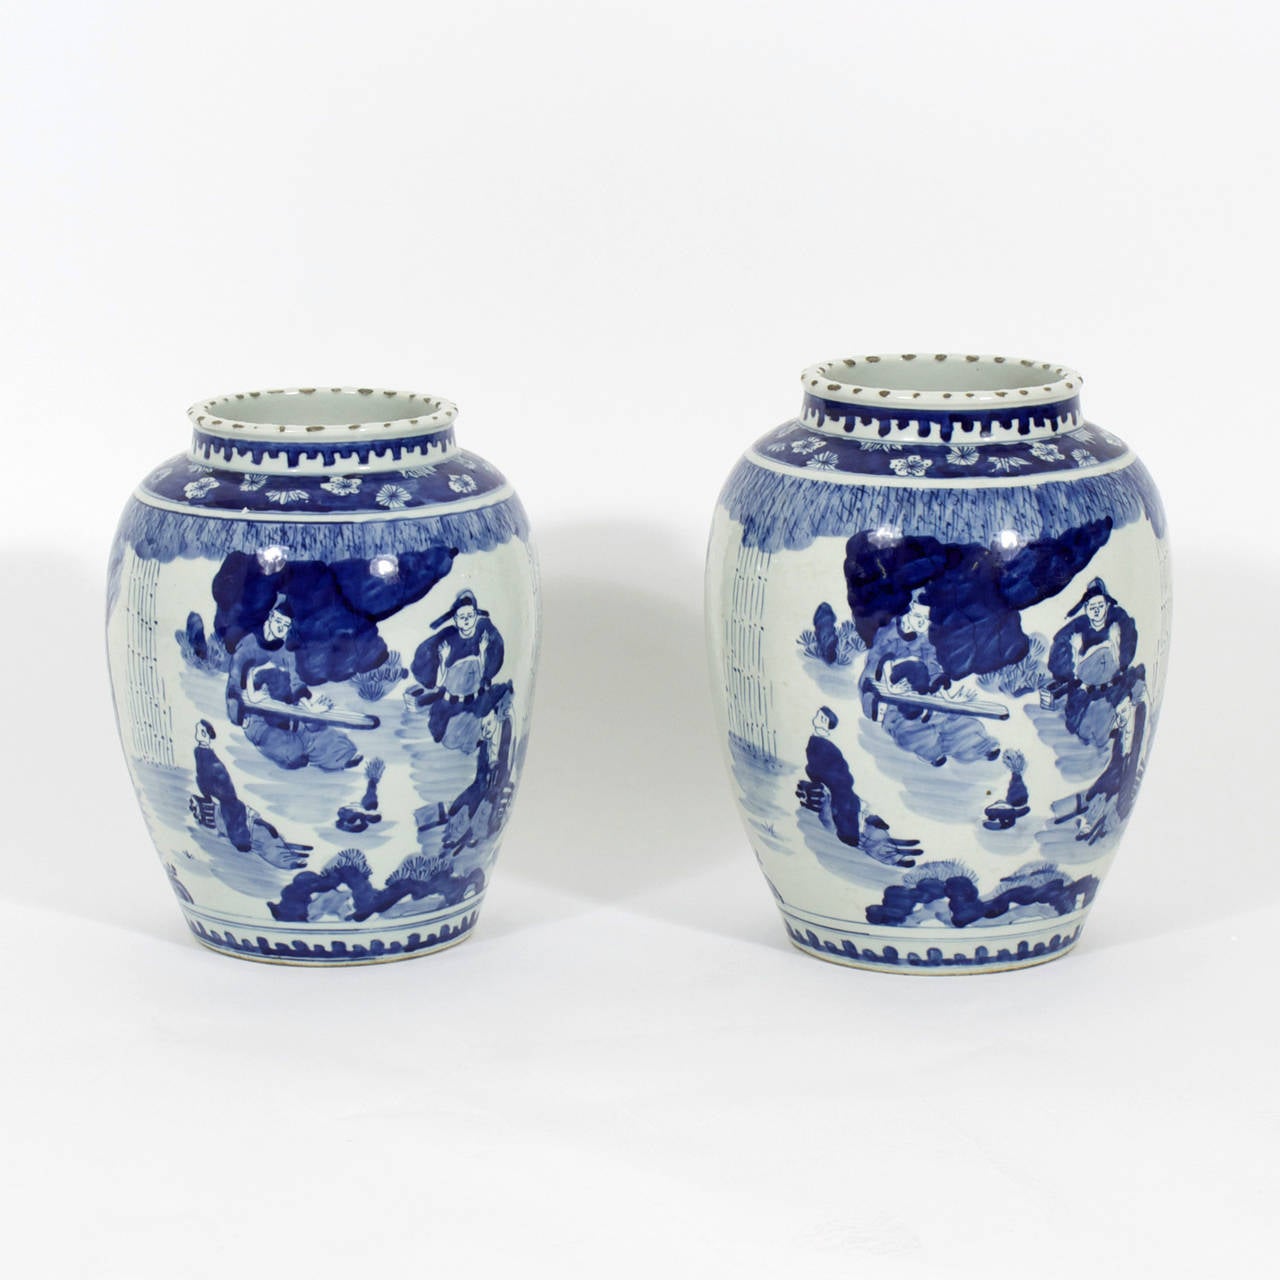 A pair of Chinese Export blue and white vases,  with tropical and and people scenes. Robust shape with nice borders. Please note that one pot is larger than the other.